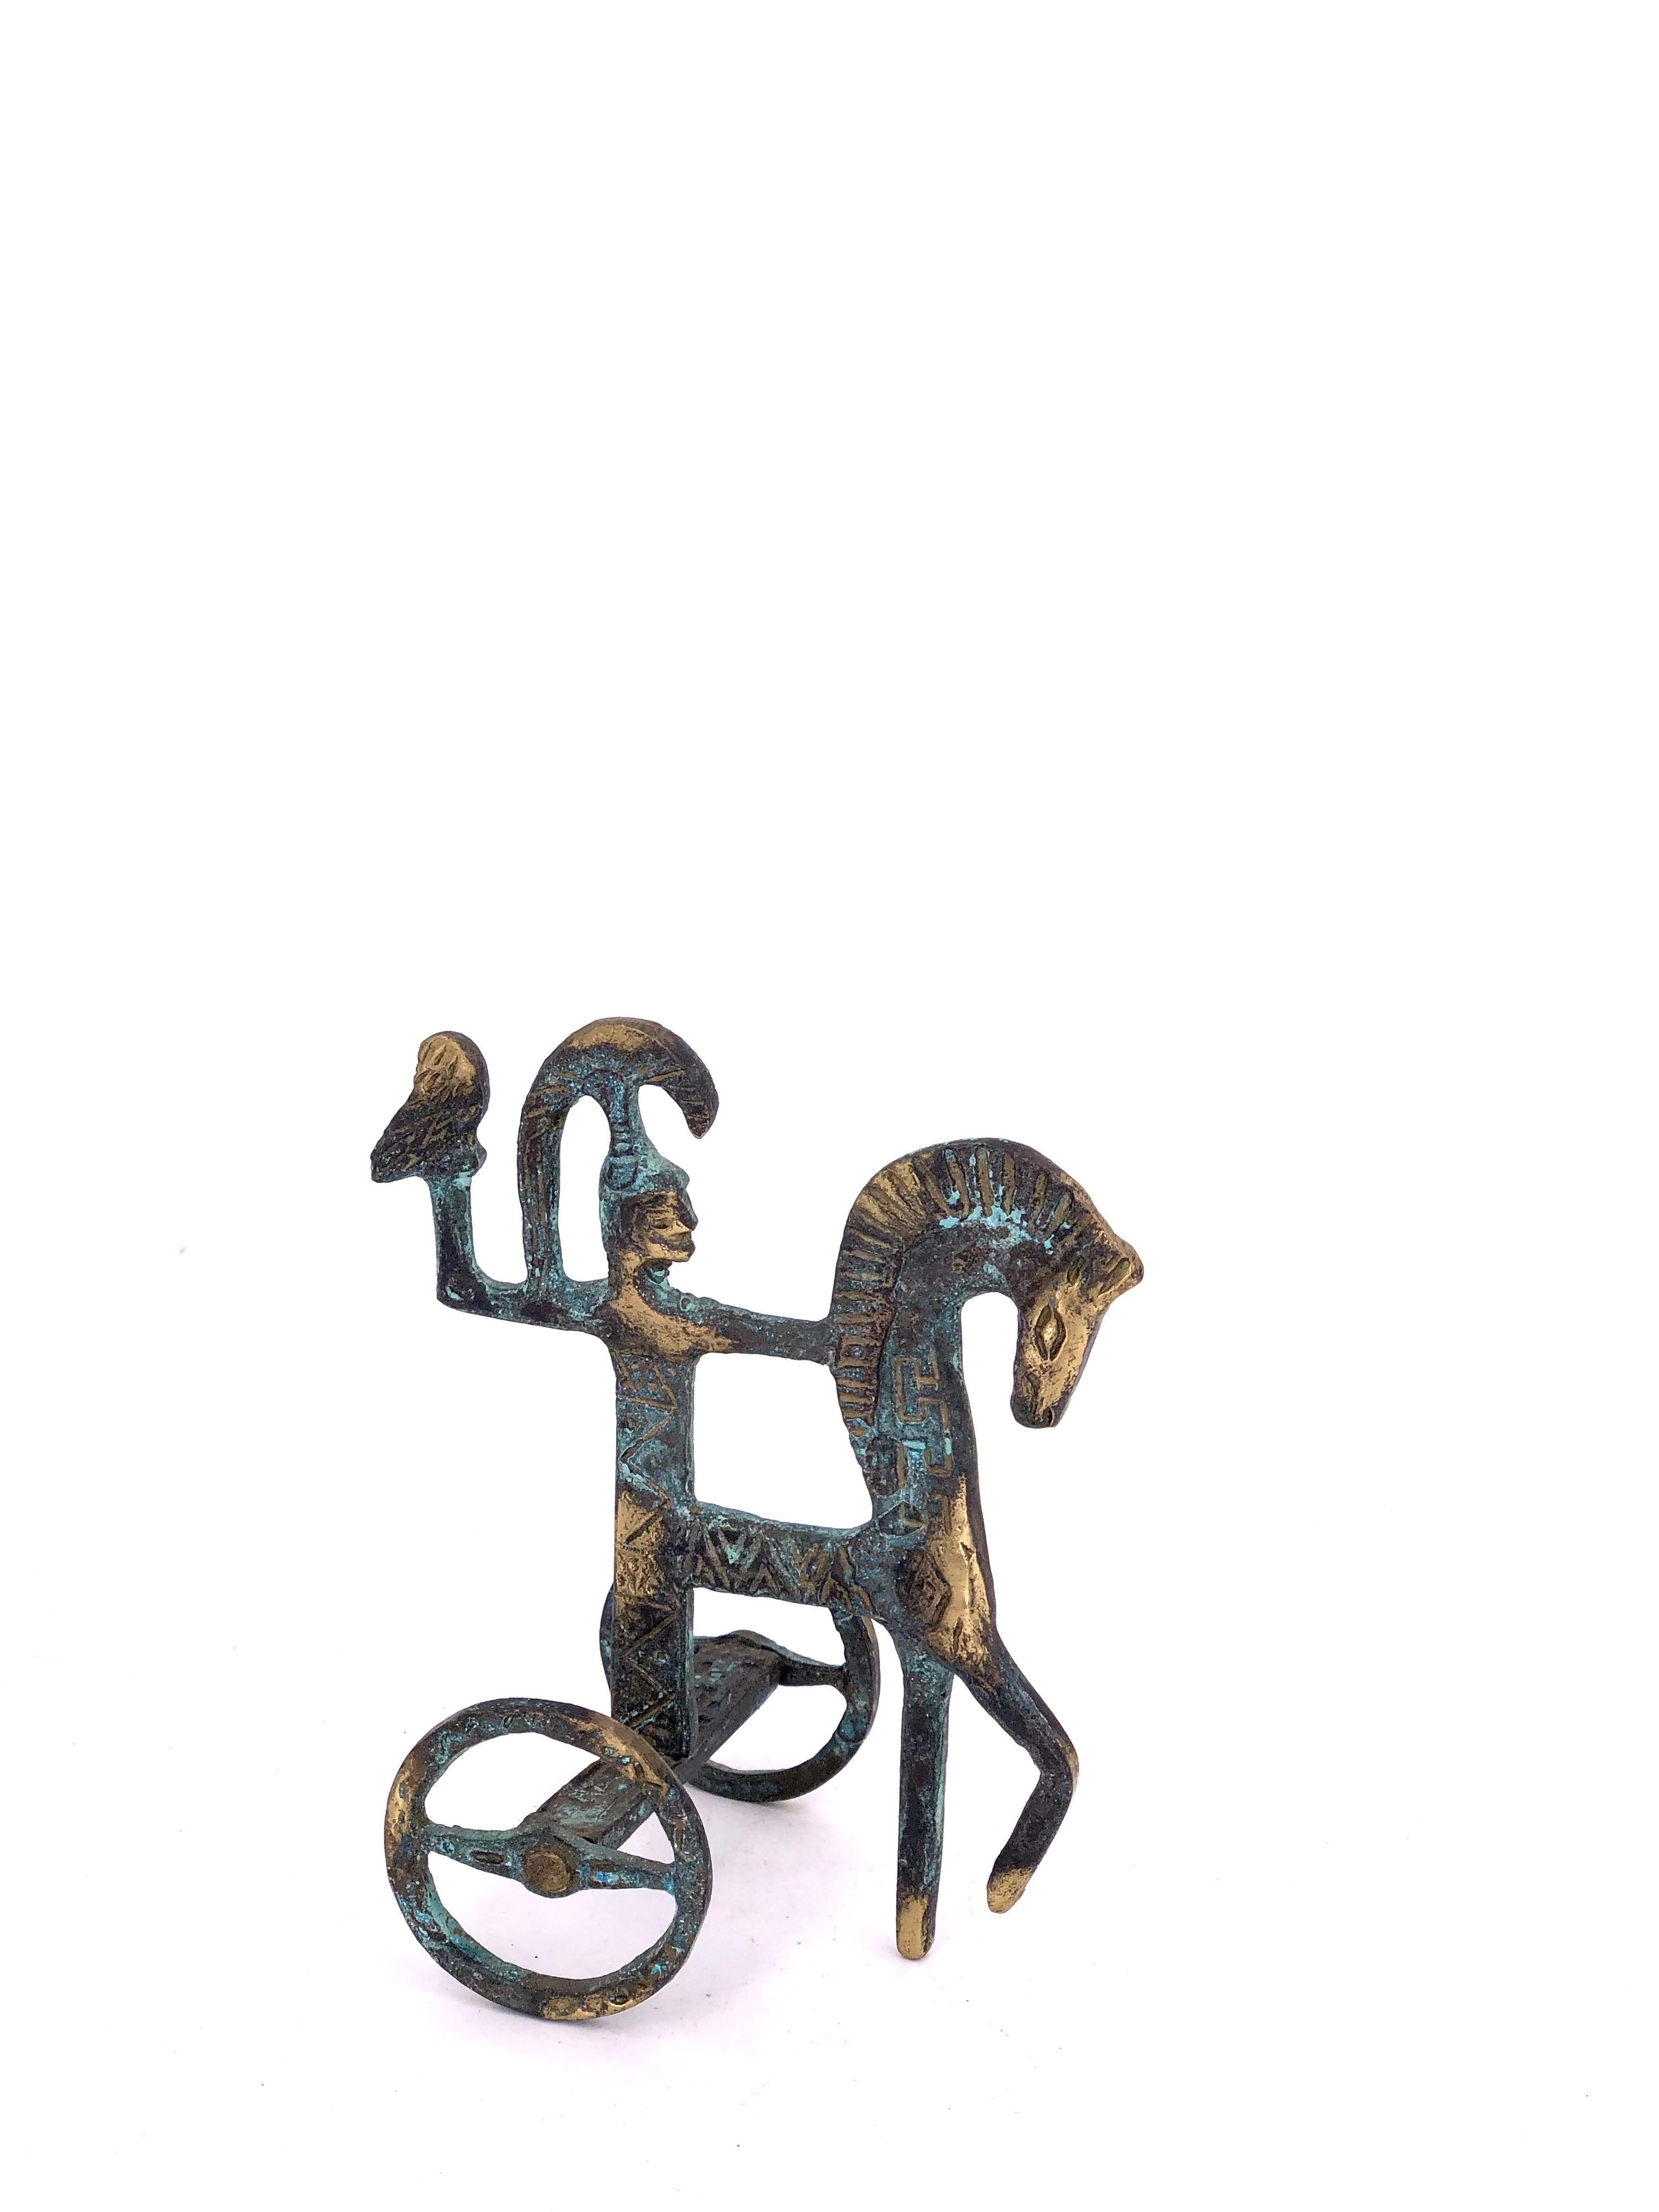 Simple and elegant Etruscan patinated brass horse and chariot sculpture in the style of Frederic Weinberg, circa 1960s. Minimalist and modern, this piece has nice etched detailing and is perfect for an office or mantel.